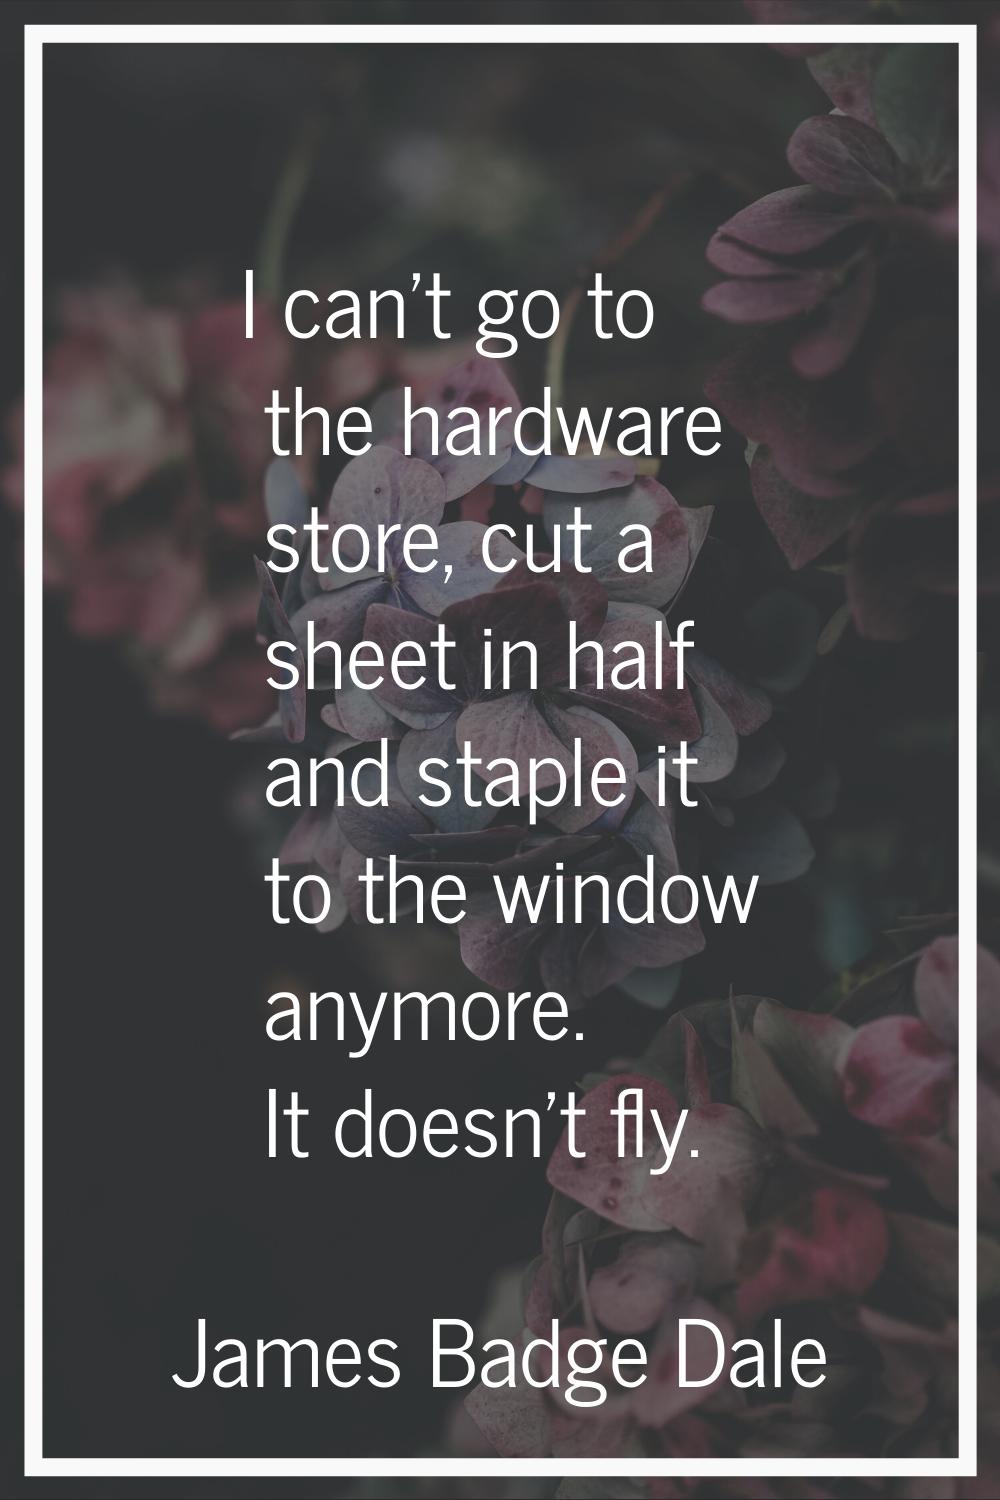 I can't go to the hardware store, cut a sheet in half and staple it to the window anymore. It doesn